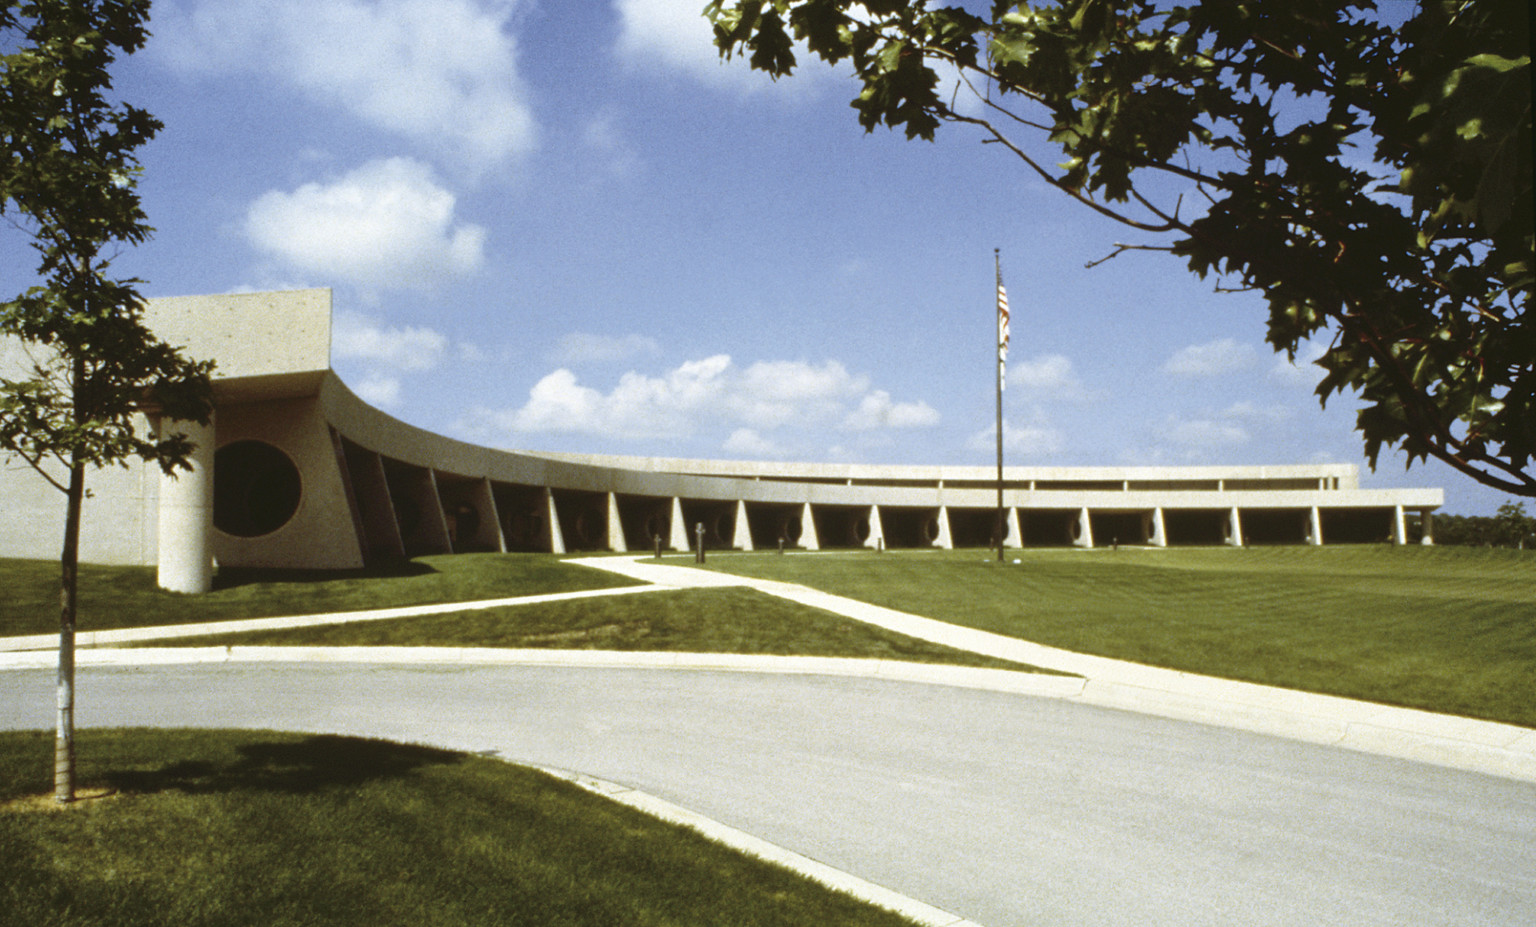 Exterior of Central States Health and Life Insurance Building, a curved concrete building on green lawn with American flag